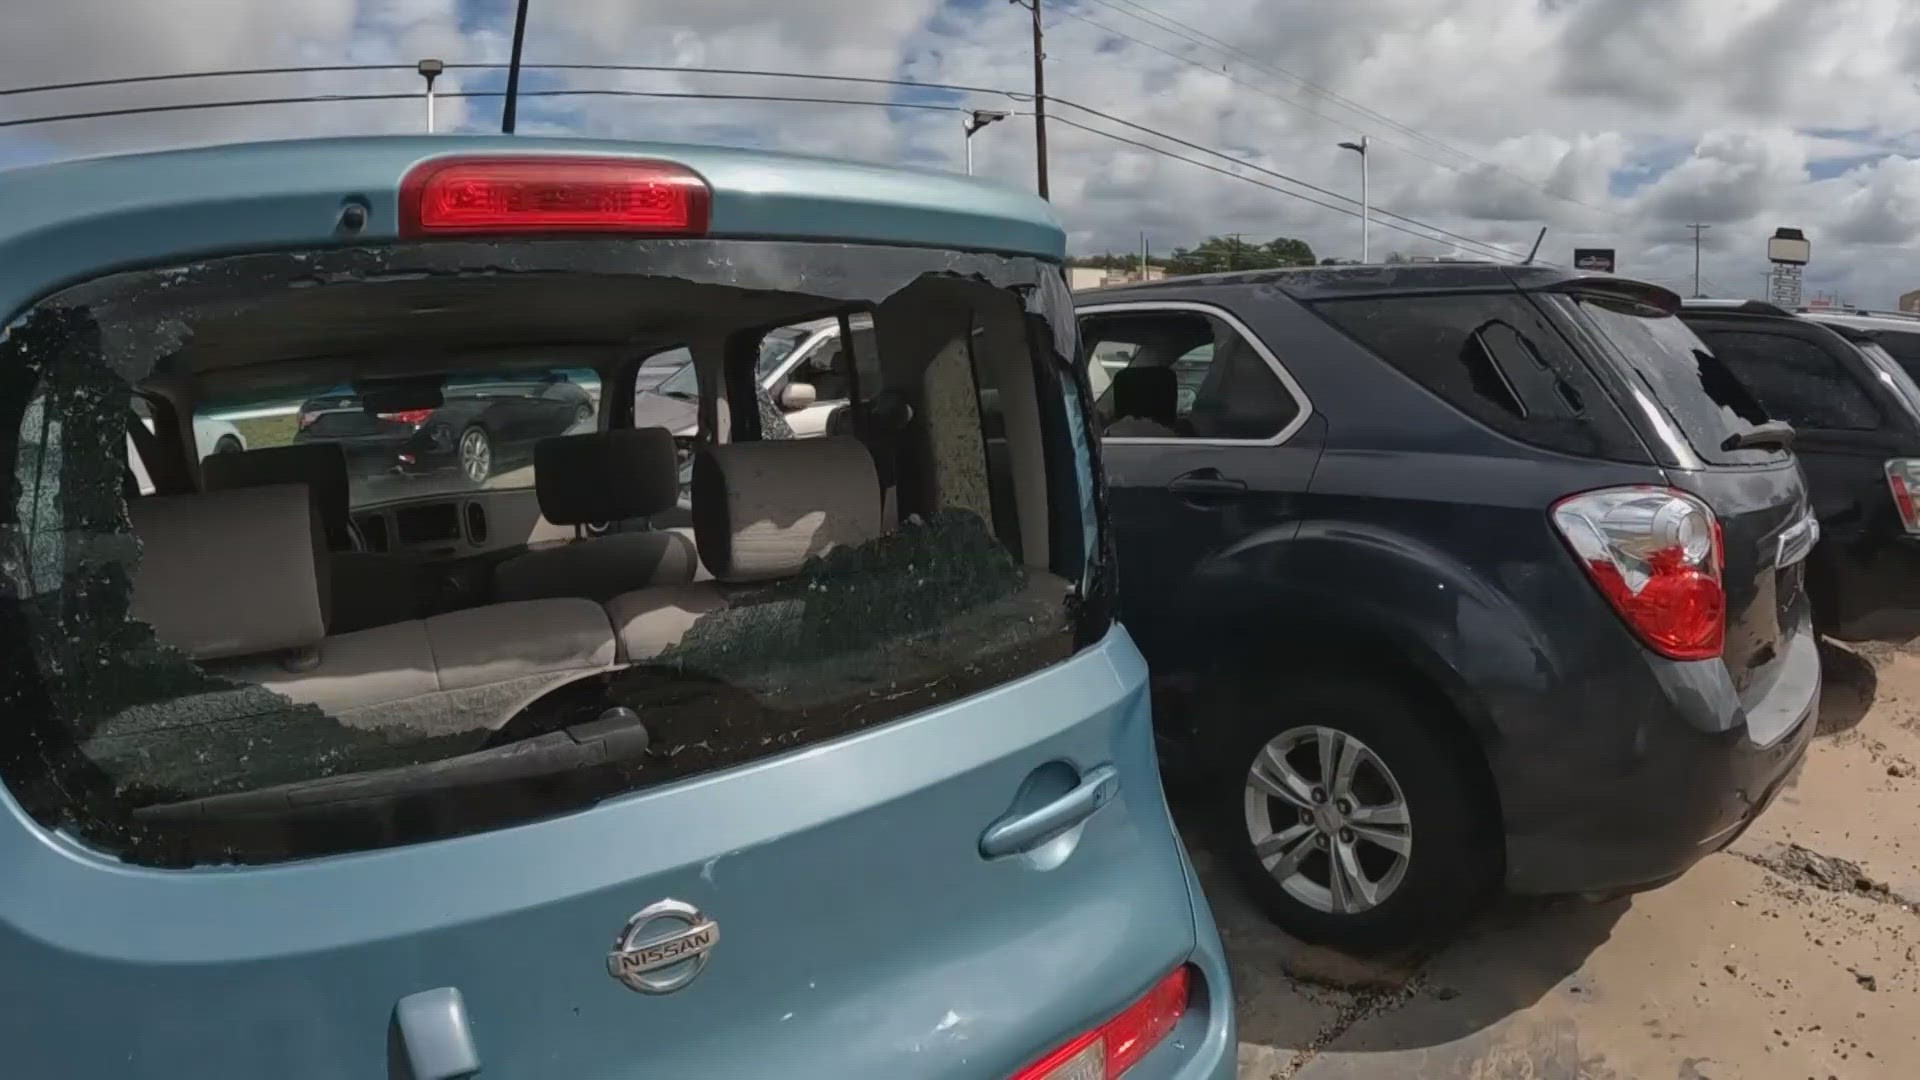 Special Touch II Auto Sales owner Edward Andrews estimates 30 to 35 cars need new windows after wind blew a nearby roof into his lot.